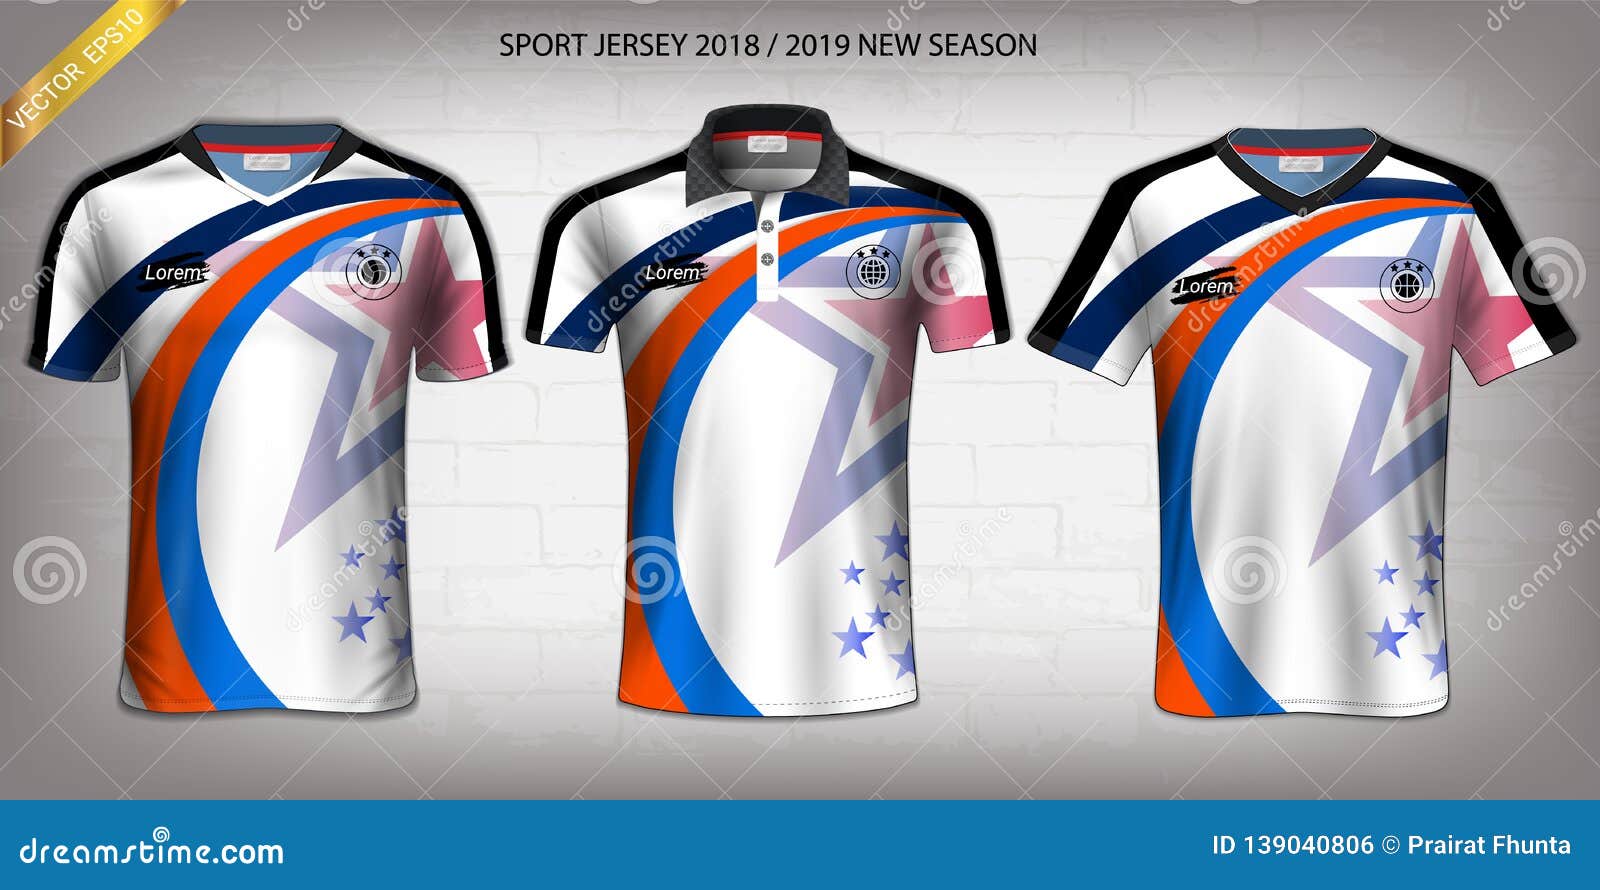 rugby jersey design 2019